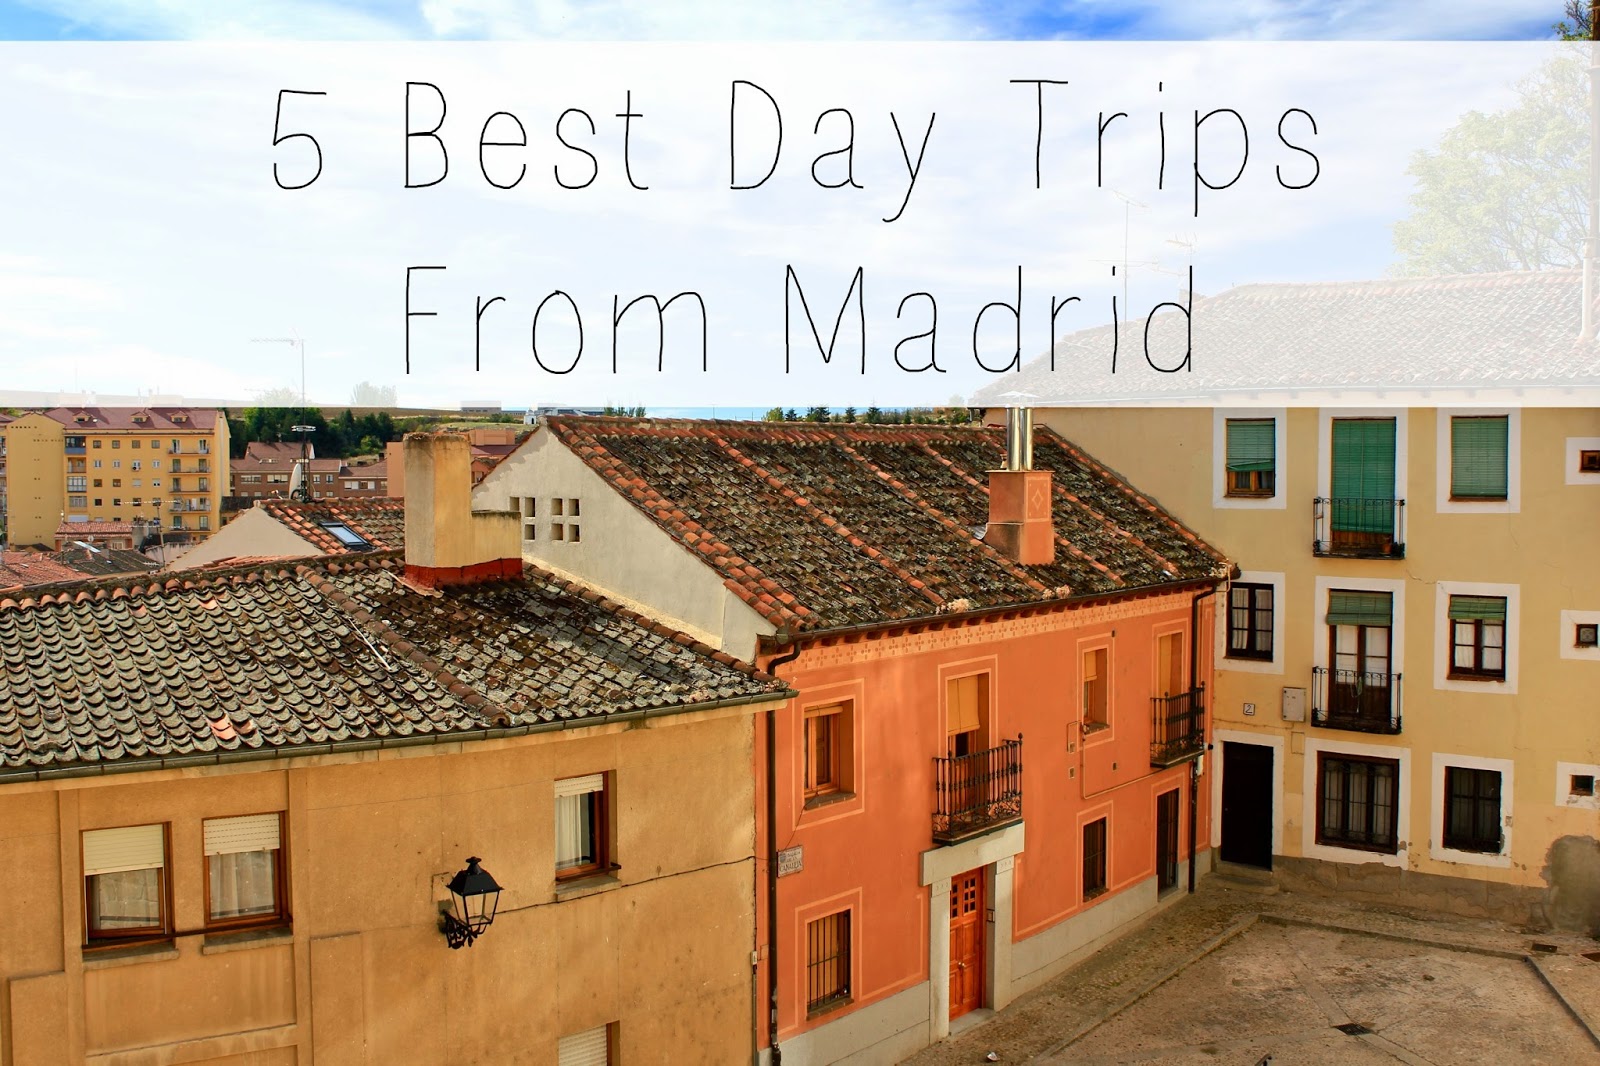 The 5 best day trips from Madrid - all less than 2 hours away from the city center! | Adelante